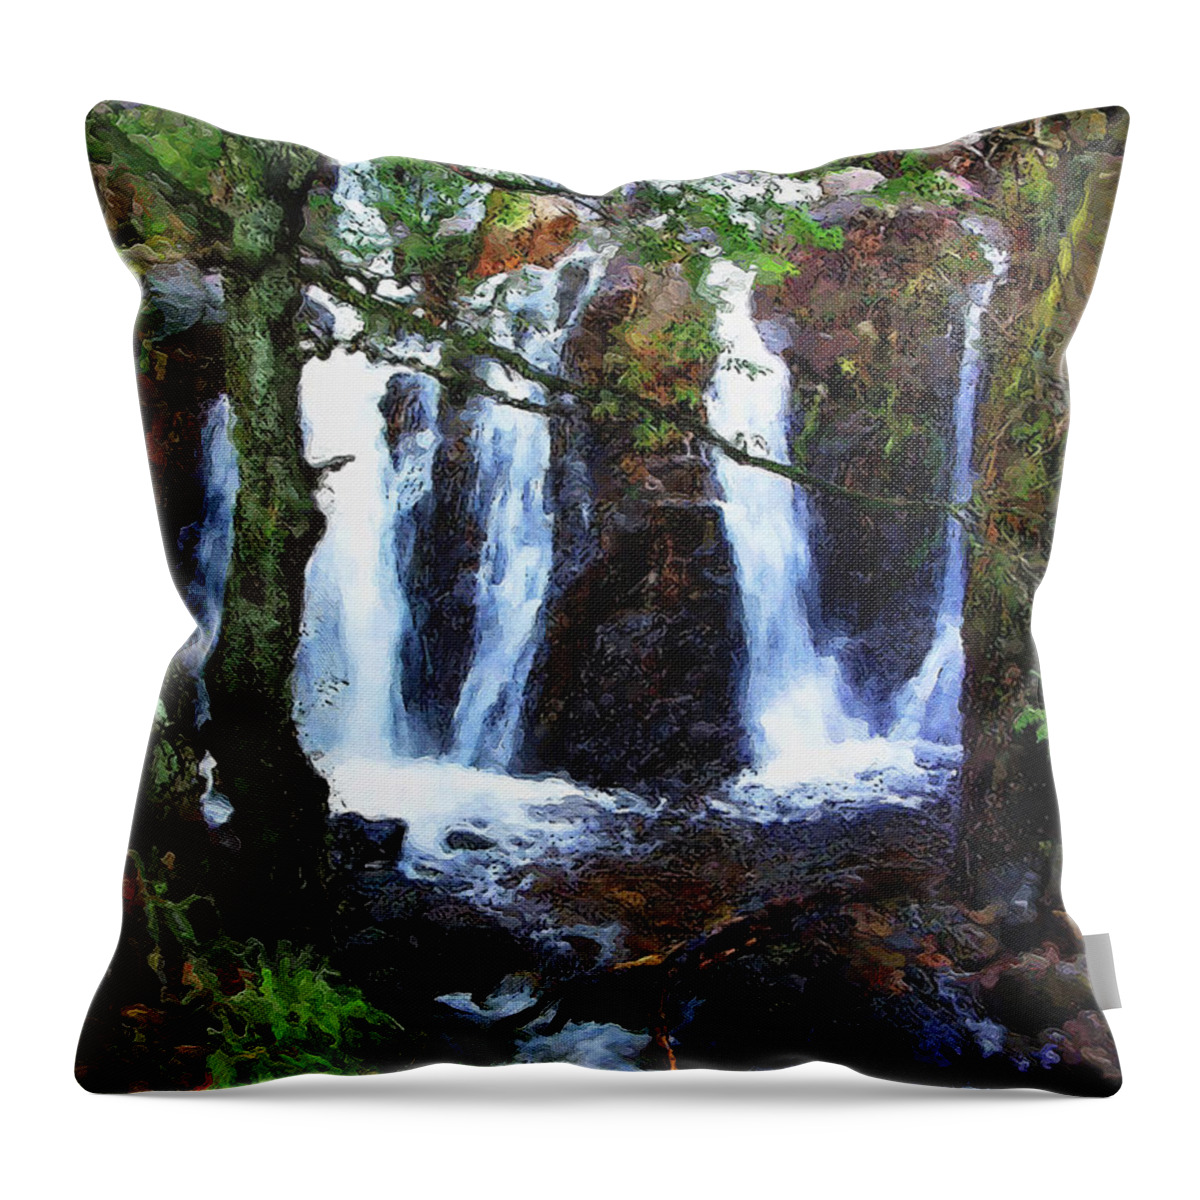 Lake District Throw Pillow featuring the photograph Langdale Waterfall by Brian Watt